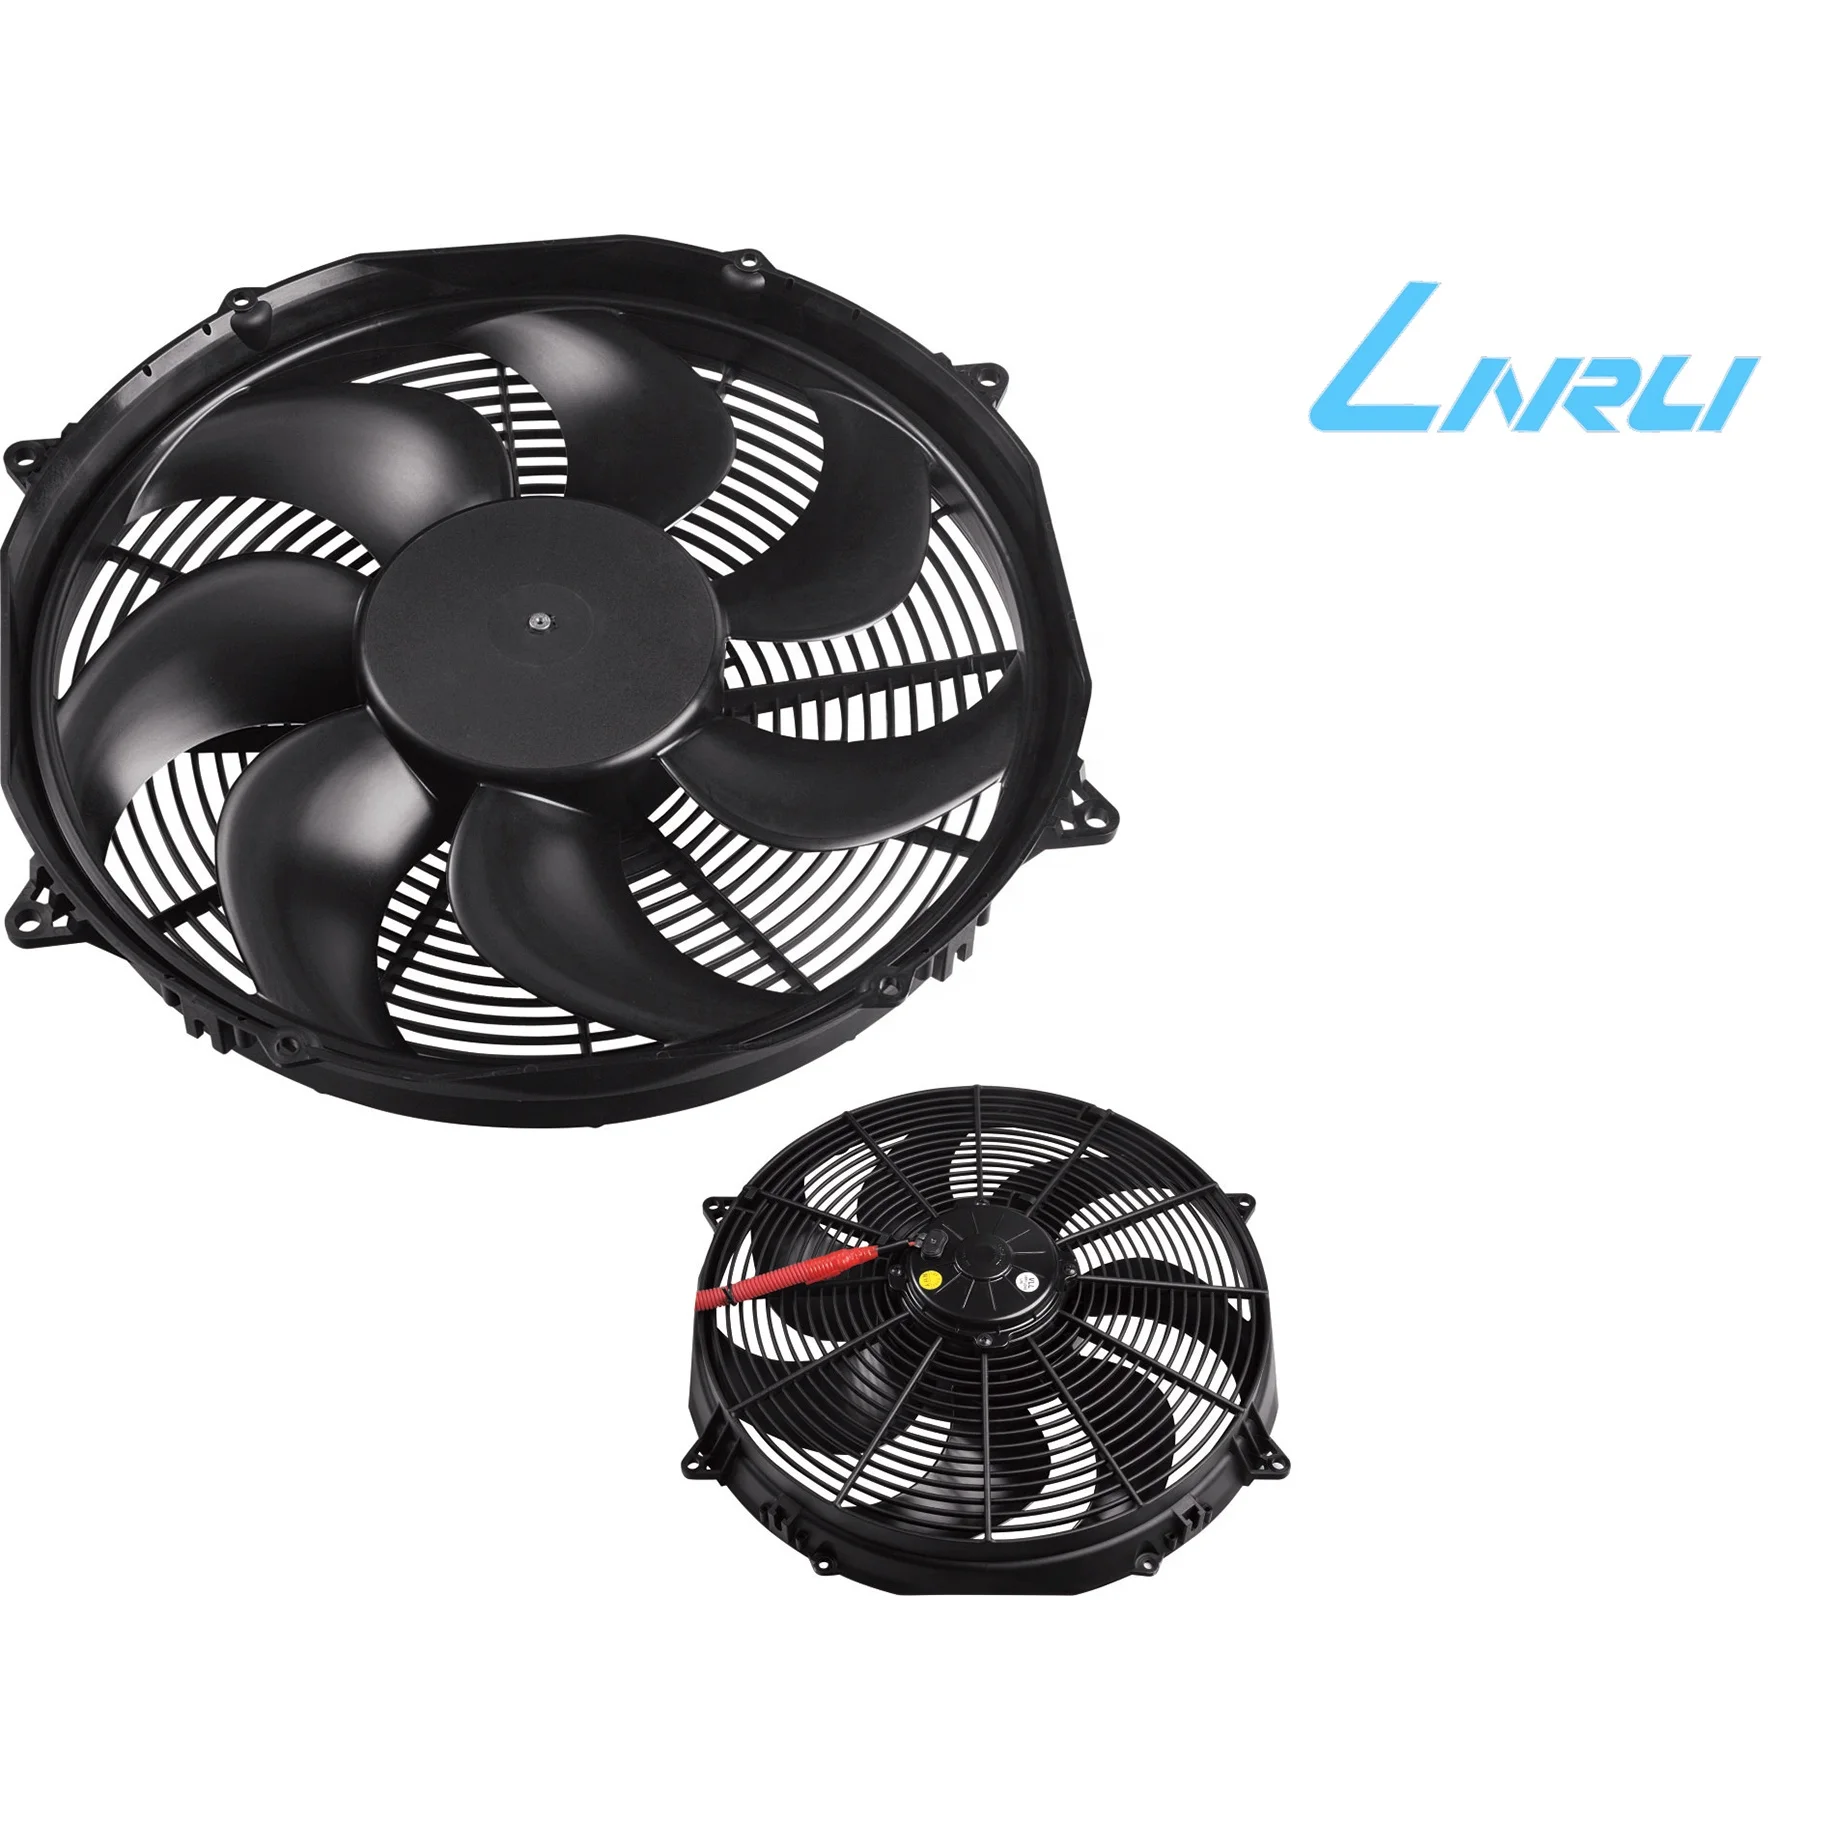 High Performance And Lower Price 24v Bus Condenser Fan For Replacing Spal Fan Buy Bus Condenser Fan Bus Air Conditioner Condenser Fan Air Cooled Condenser Fan Product On Alibaba Com